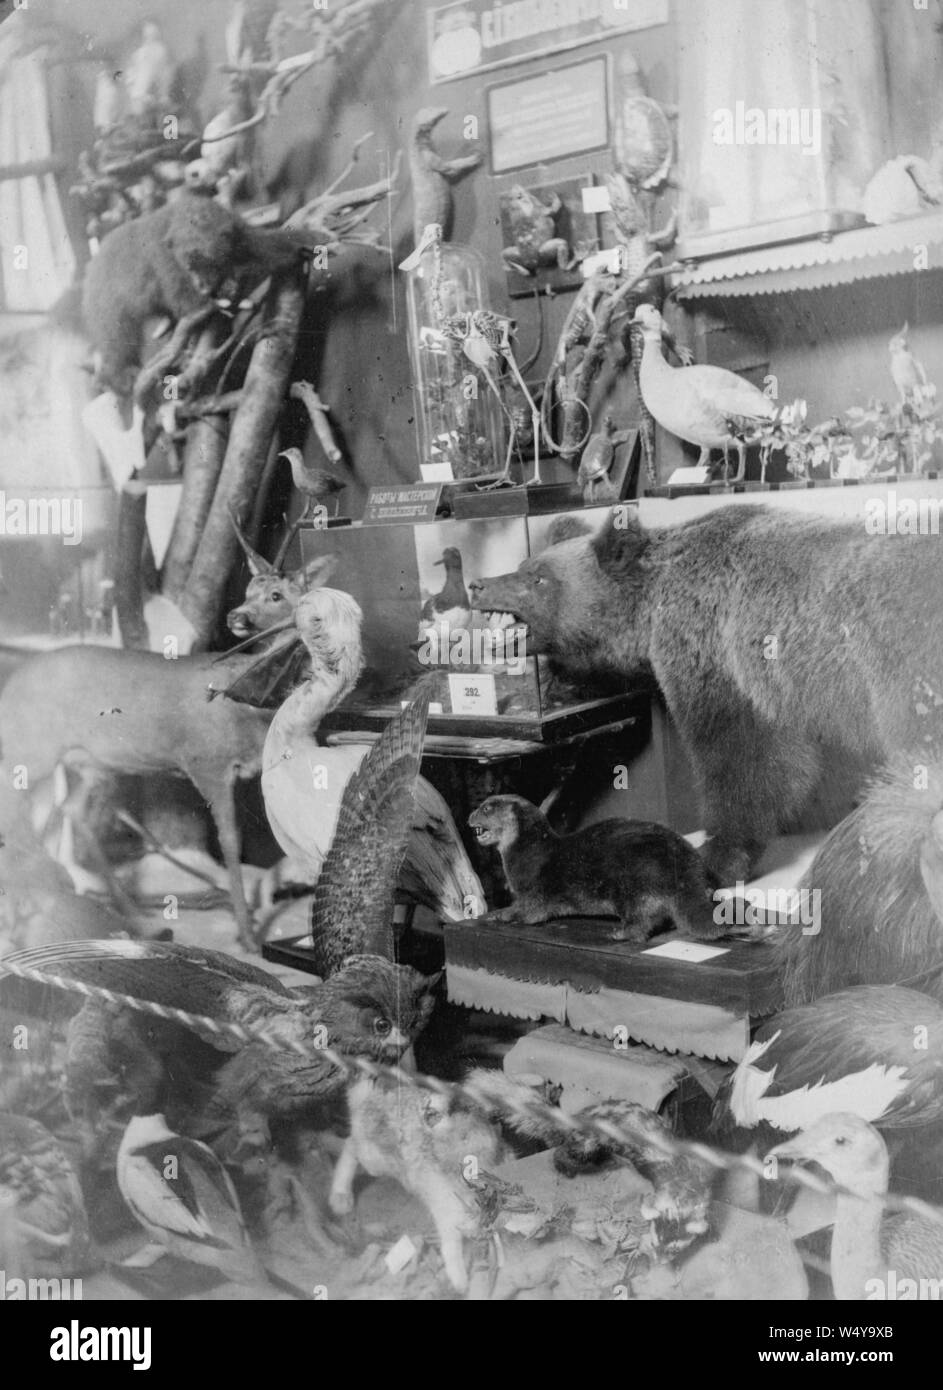 Stand at an exhibition with preserved animals from Romanov palace, Saint Petersburg, Russia, 1885. () Stock Photo